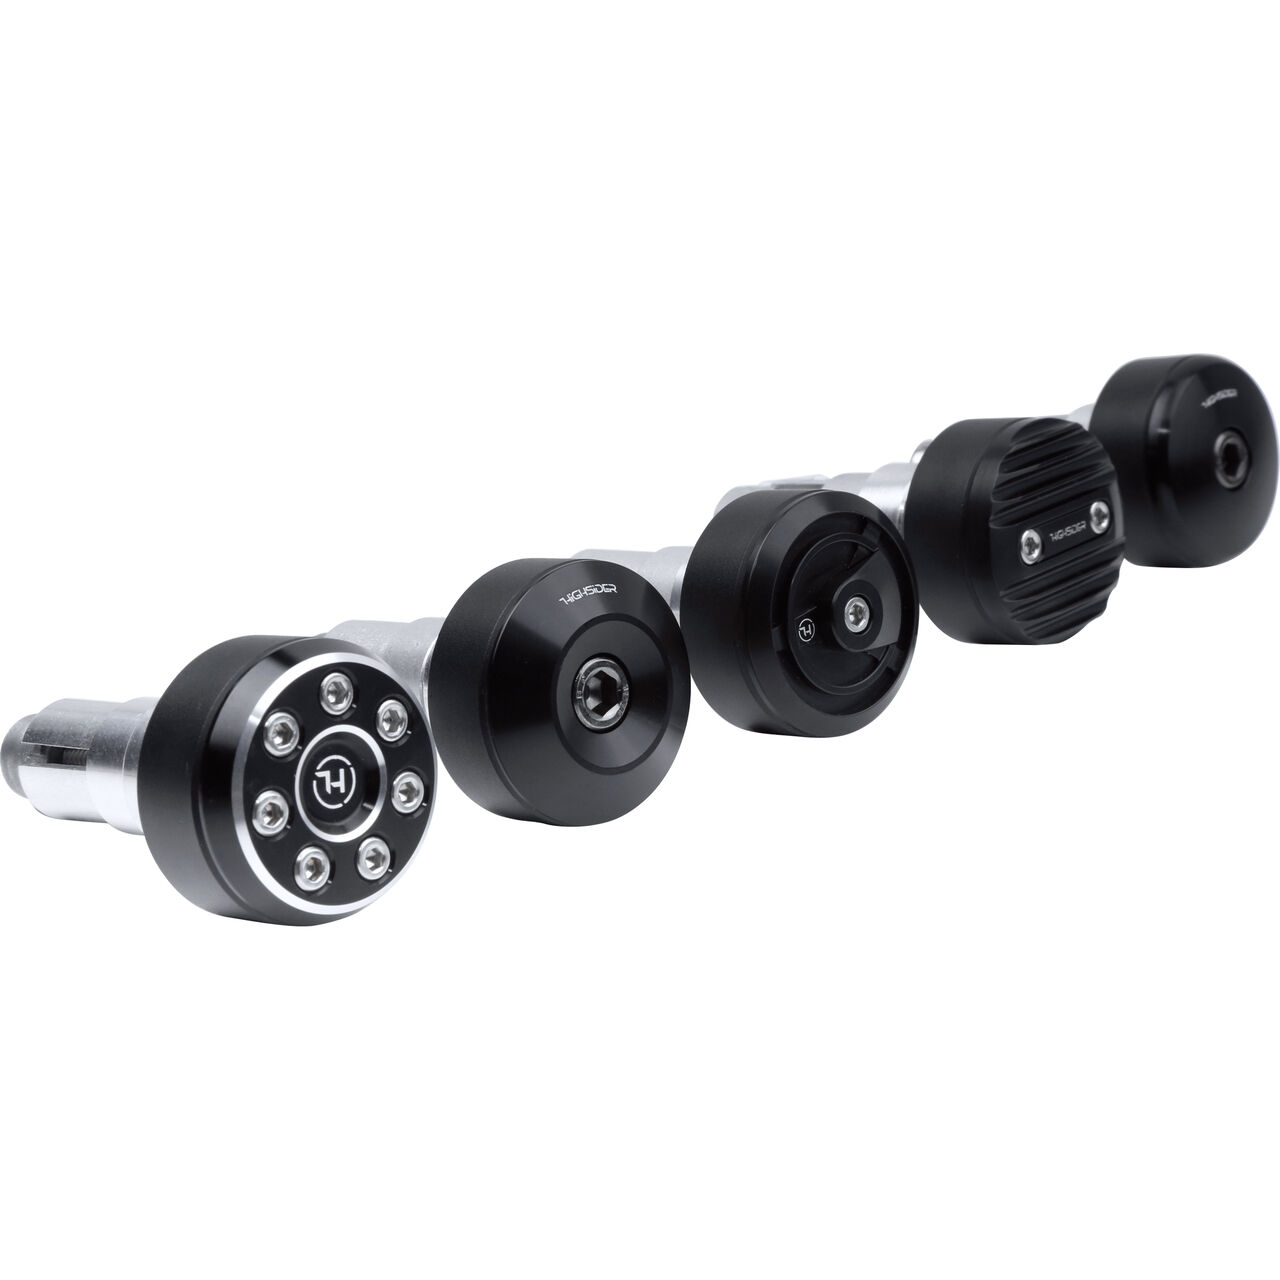 colorring for handlebar weights with mirror mount